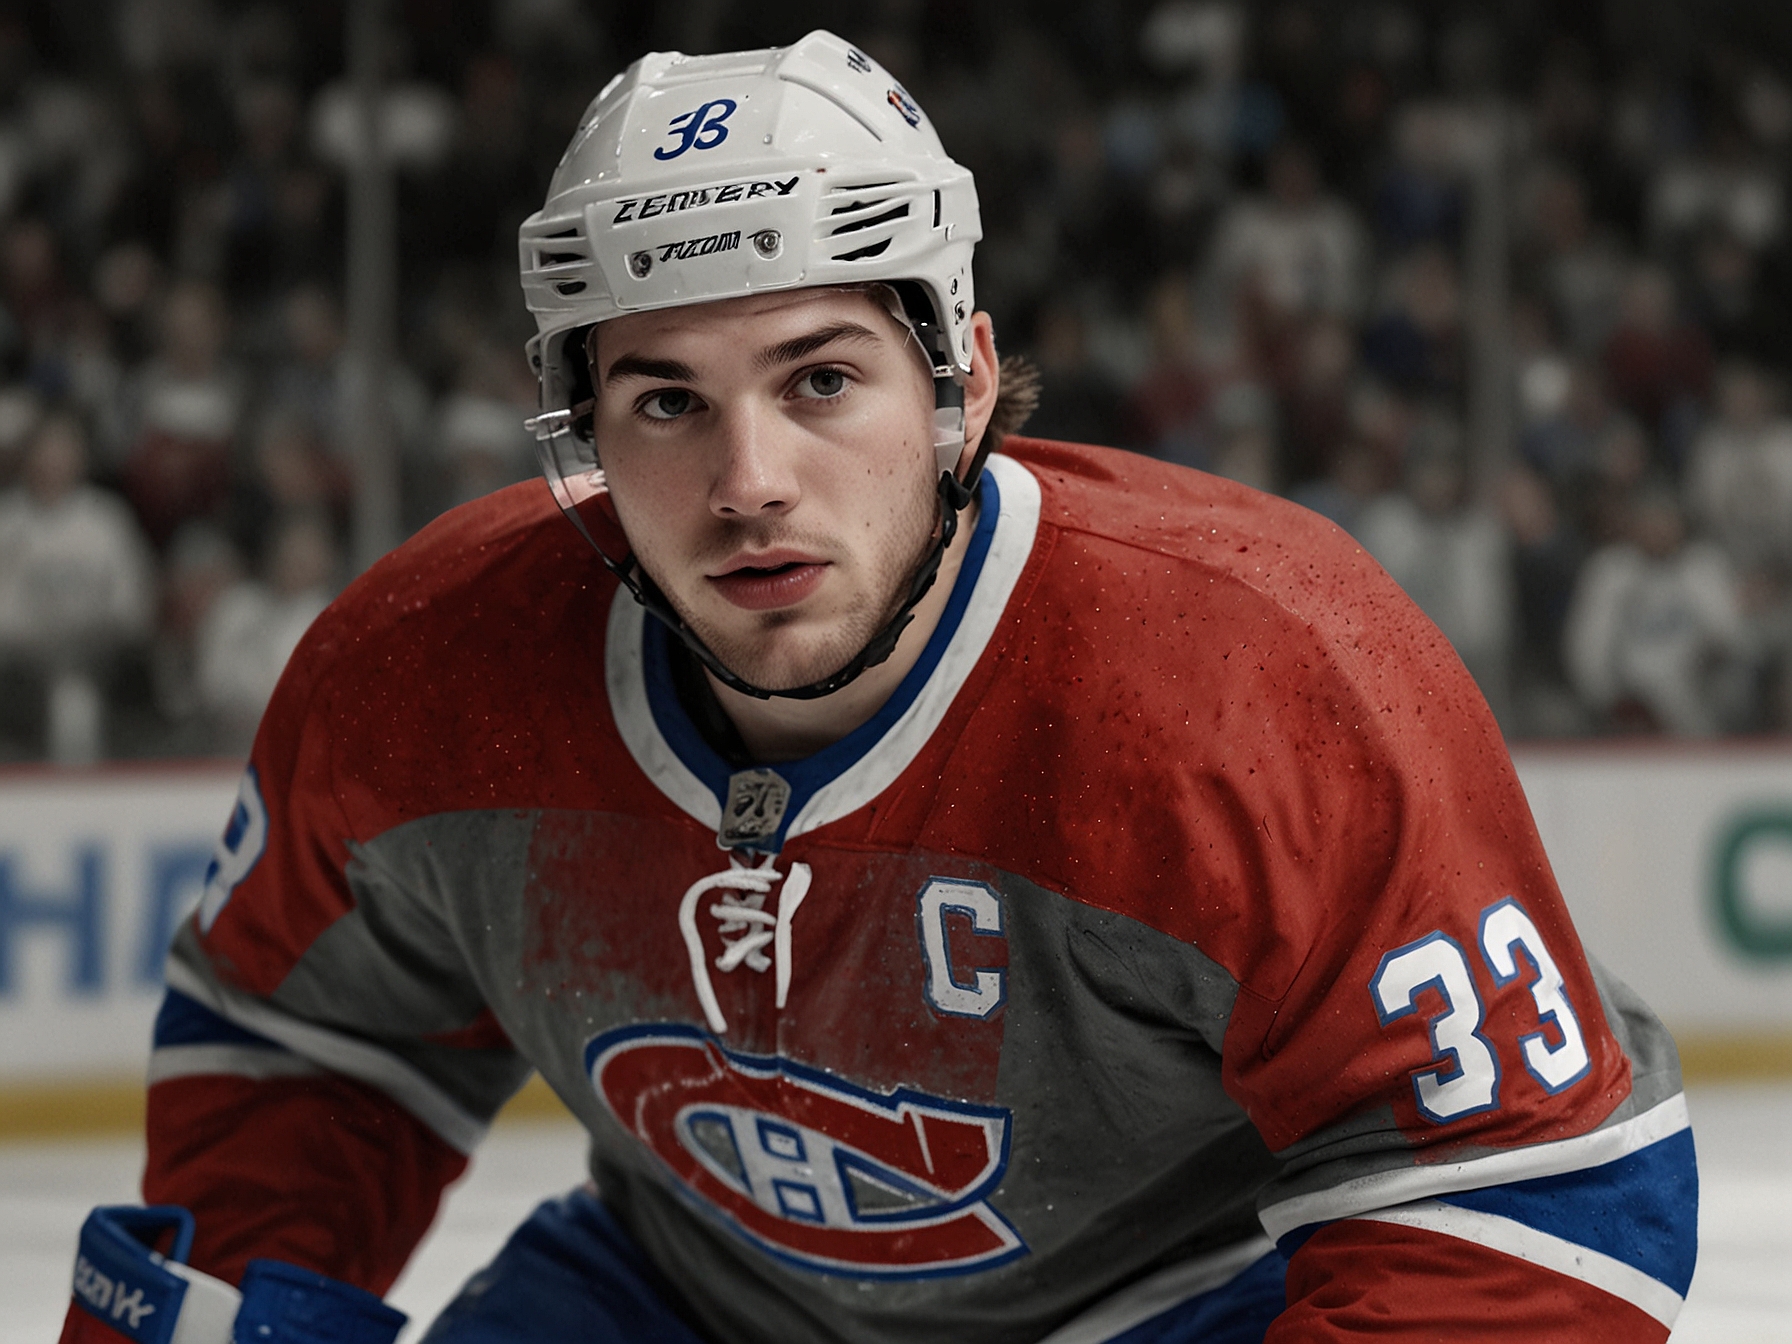 Image of Zachary Benson, a top forward prospect known for his skating and playmaking abilities, who could provide the Montreal Canadiens a dynamic offensive presence.